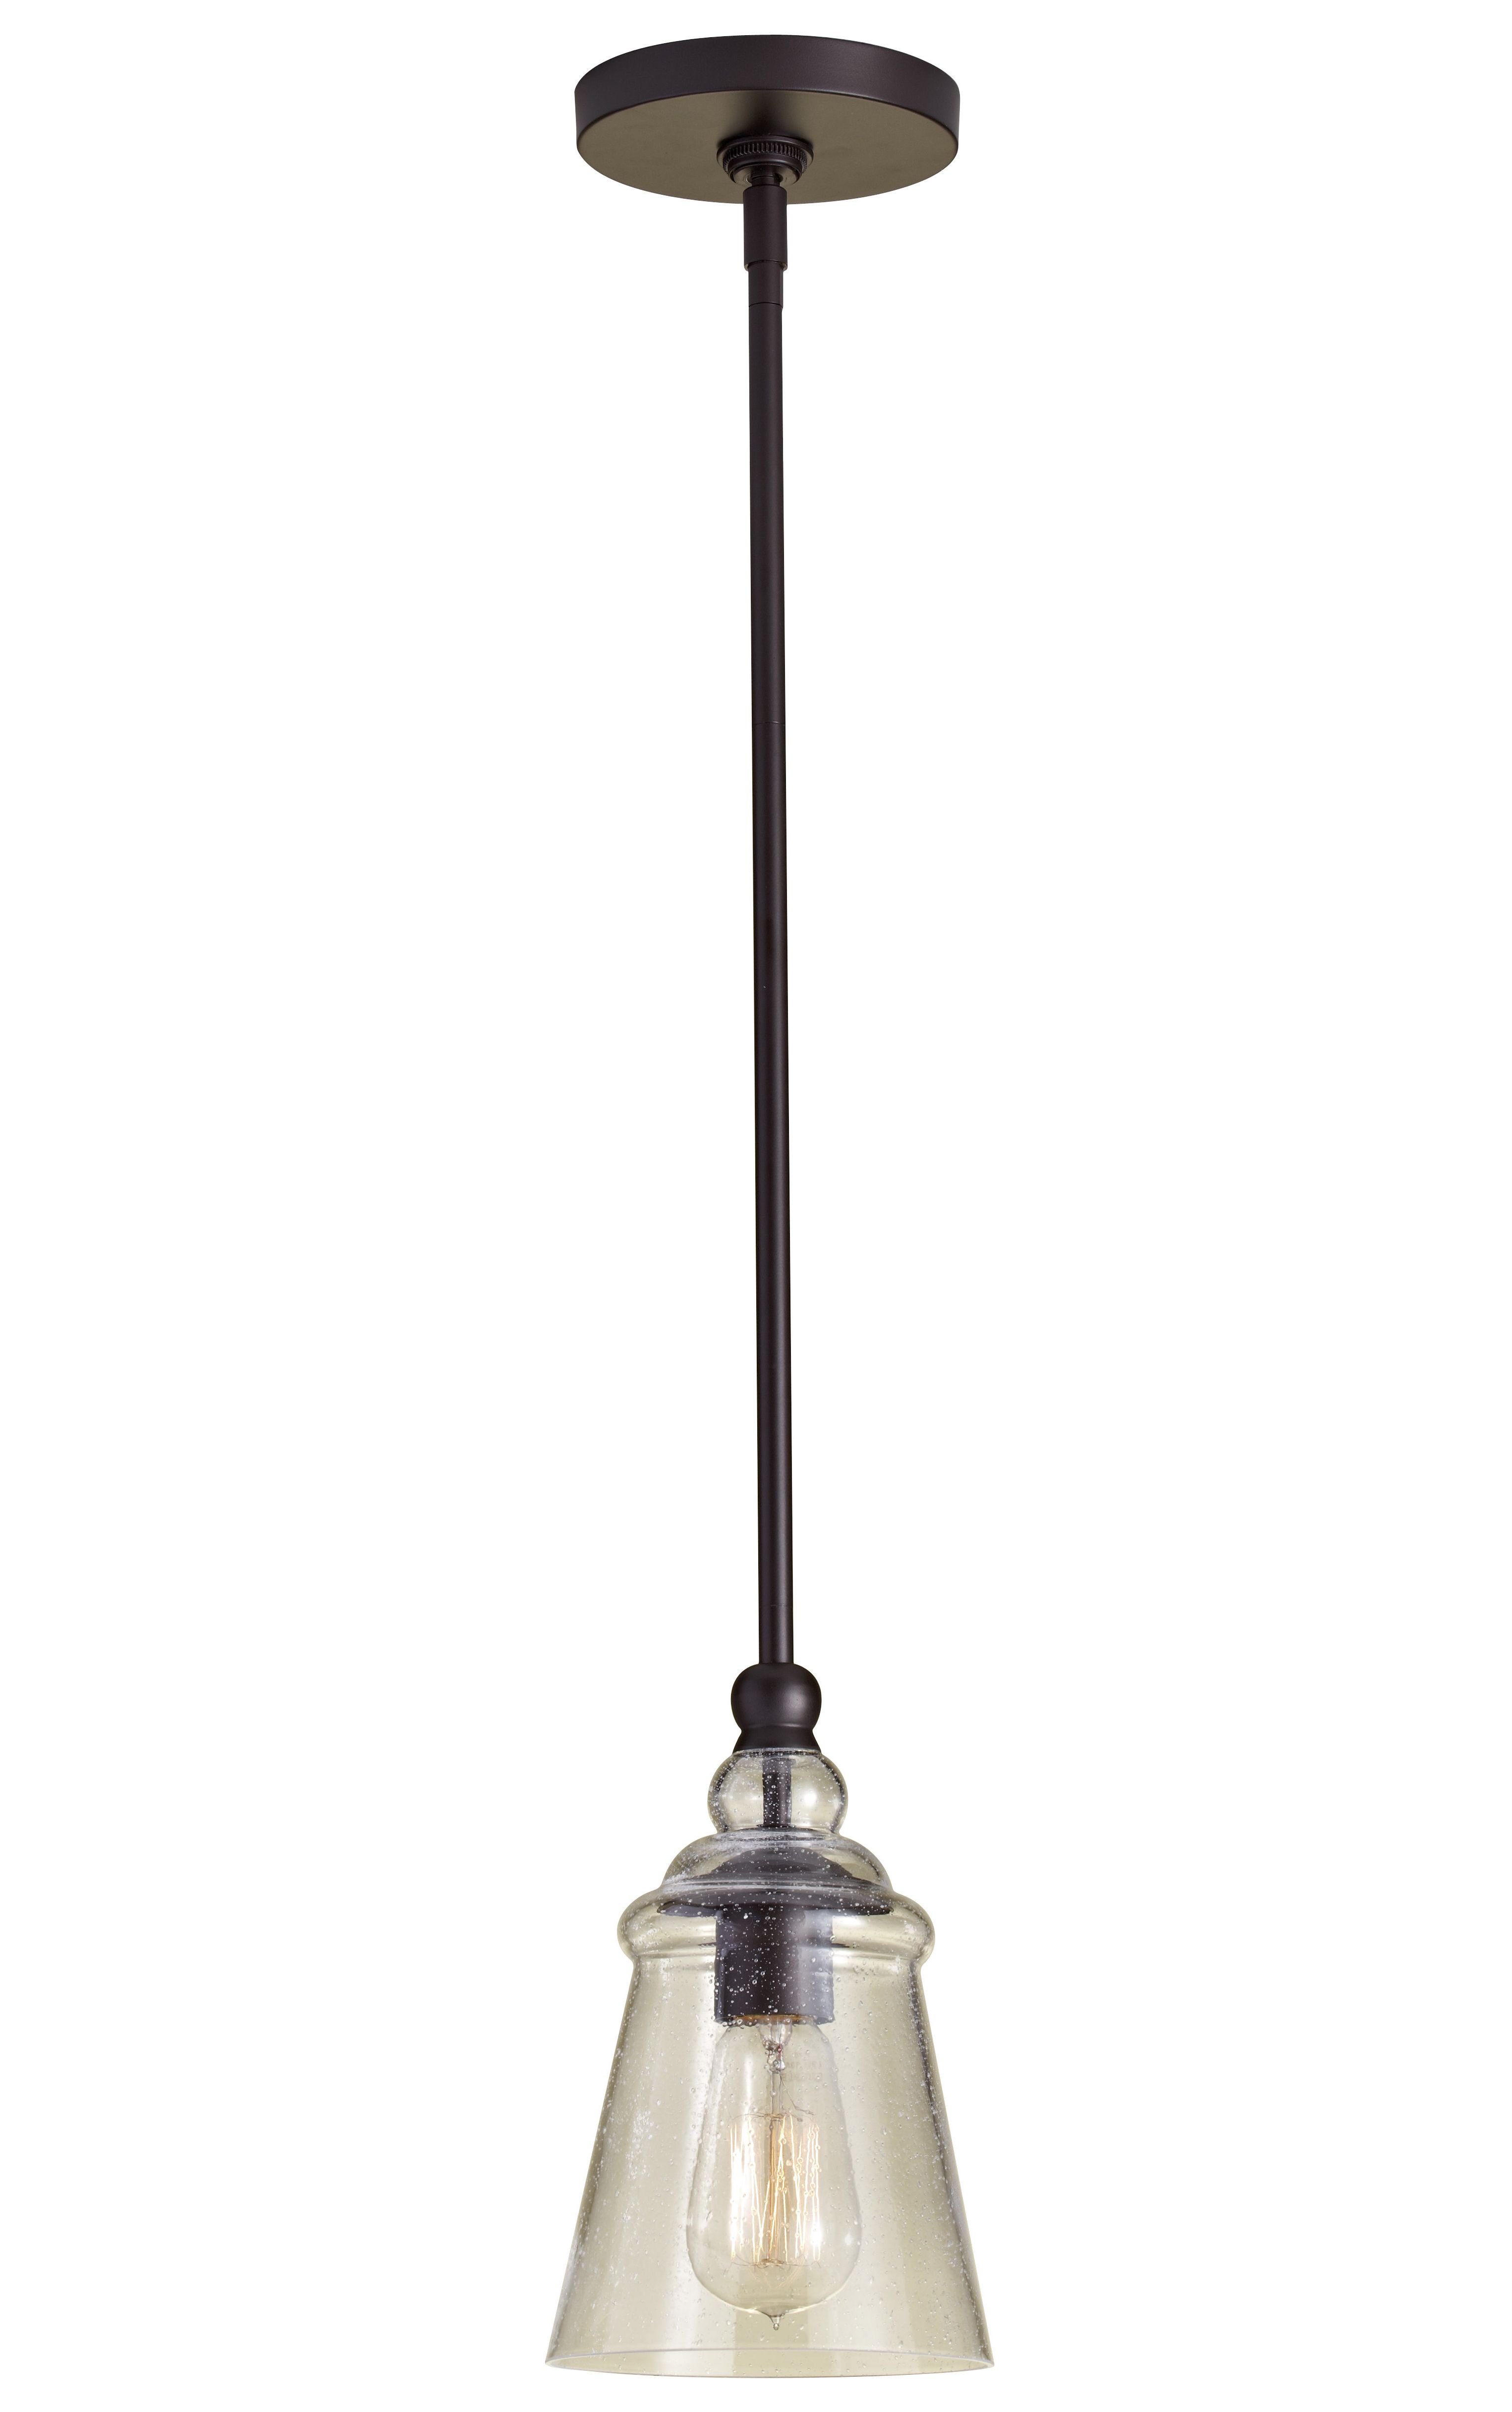 Sargent 1 Light Single Bell Pendants In Most Recently Released Sargent 1 Light Single Bell Pendant (View 1 of 20)